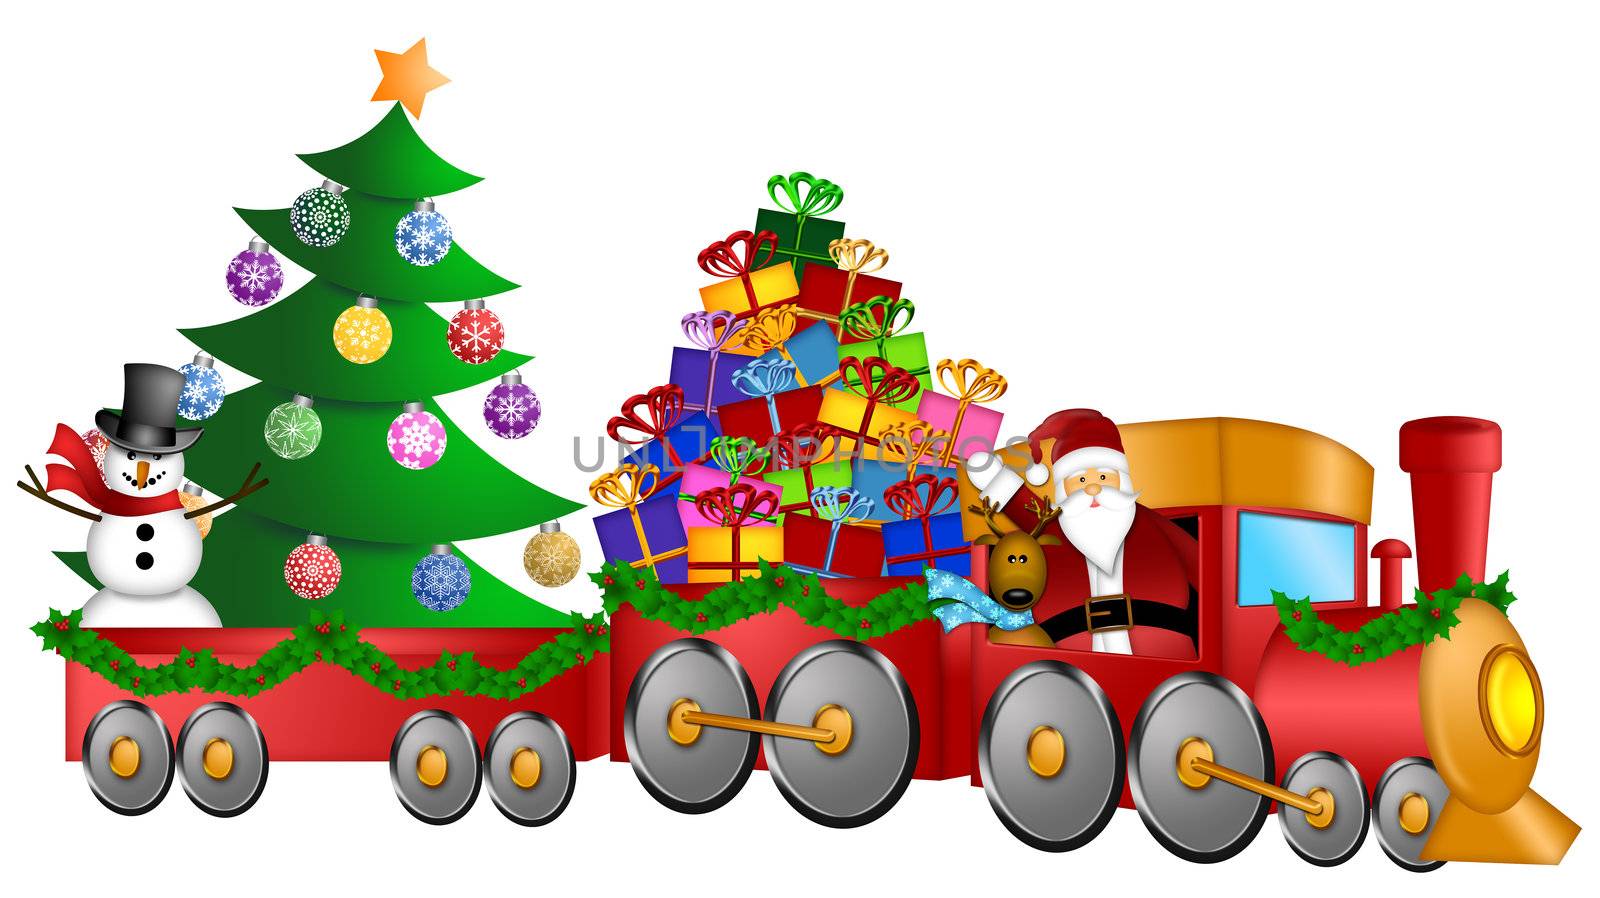 Santa Reindeer Snowman in Train with Gifts and Christmas Tree by jpldesigns